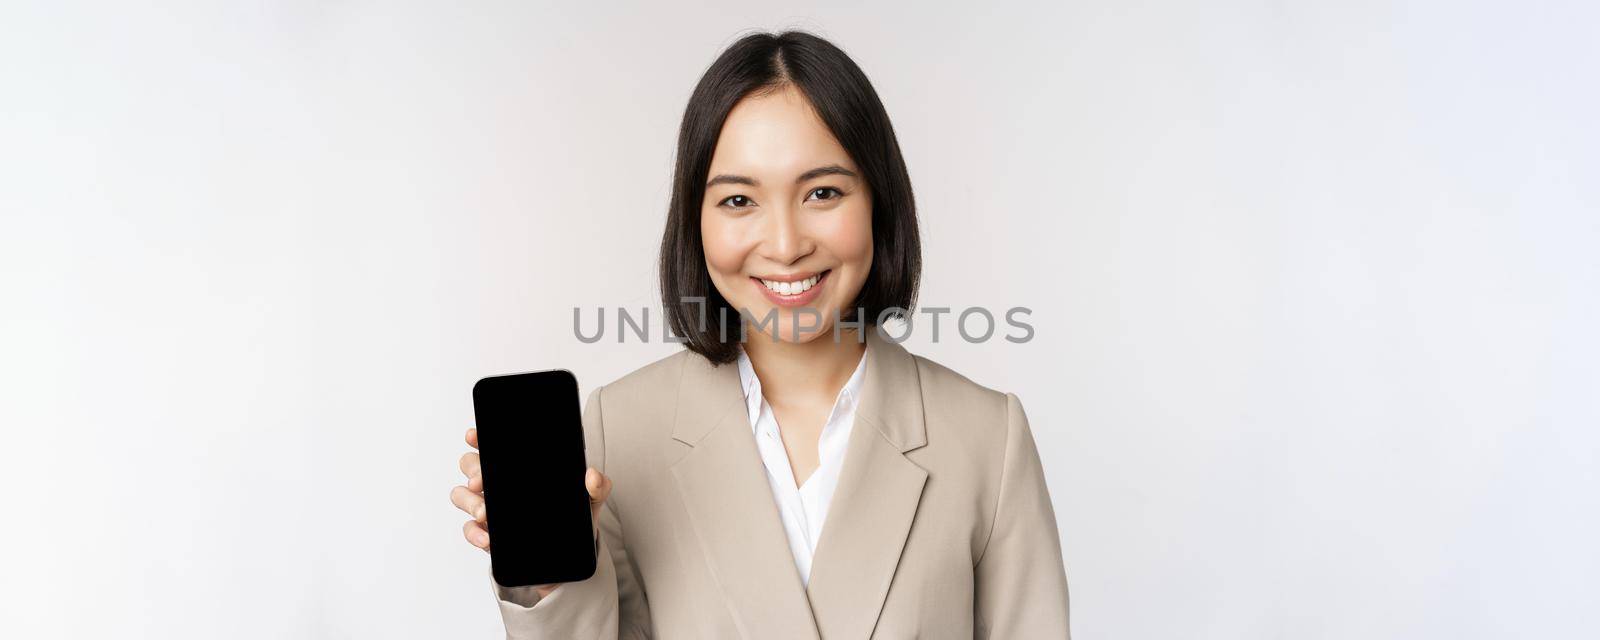 Portrait of corporate asian woman showing smartphone app interface, mobile phone screen, standing over white background.